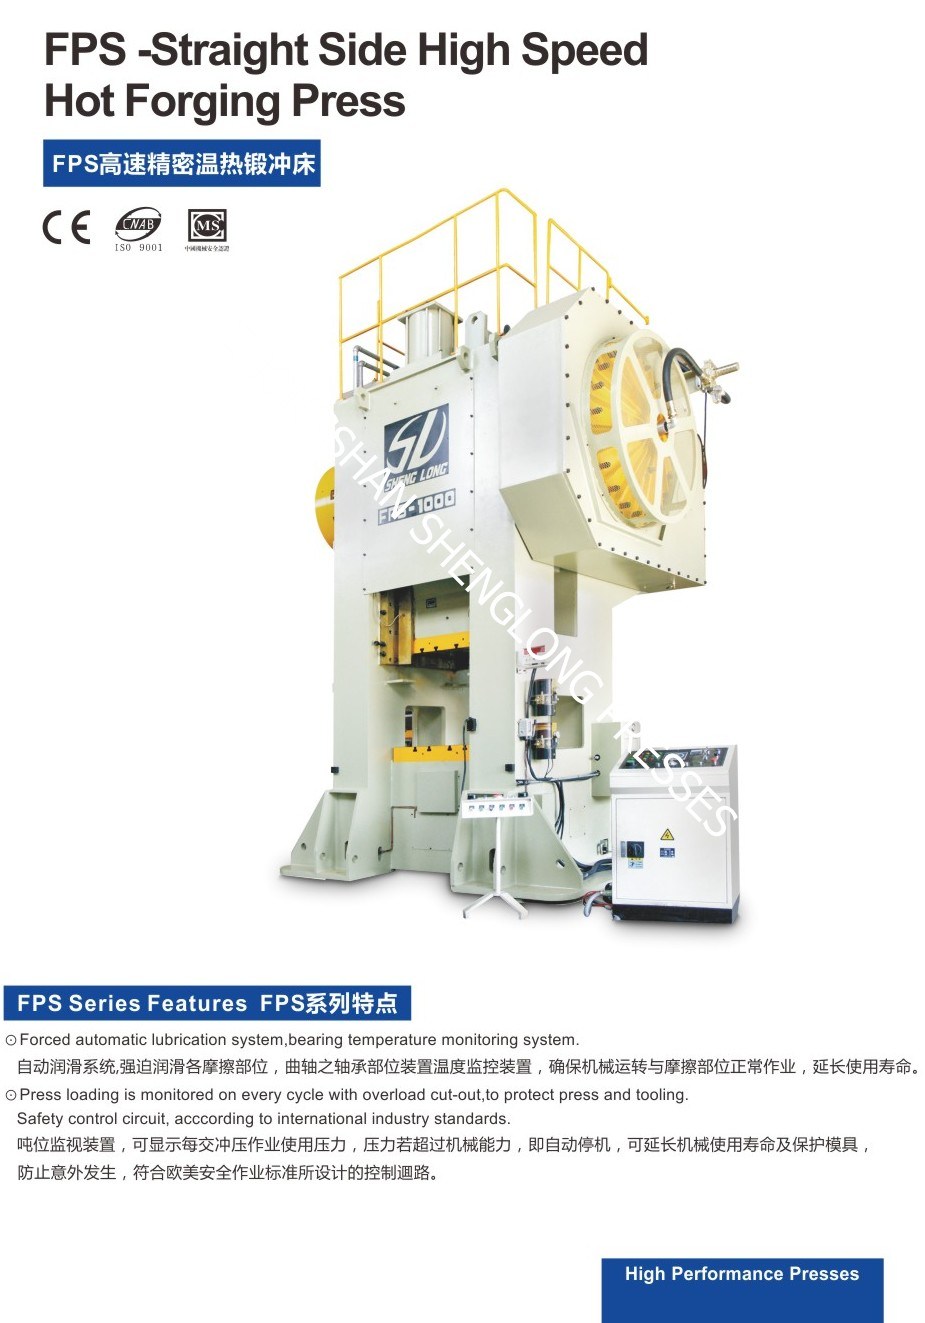 Straight Side High Speed Hot Forging Press (FPS SERIES 6000kN)